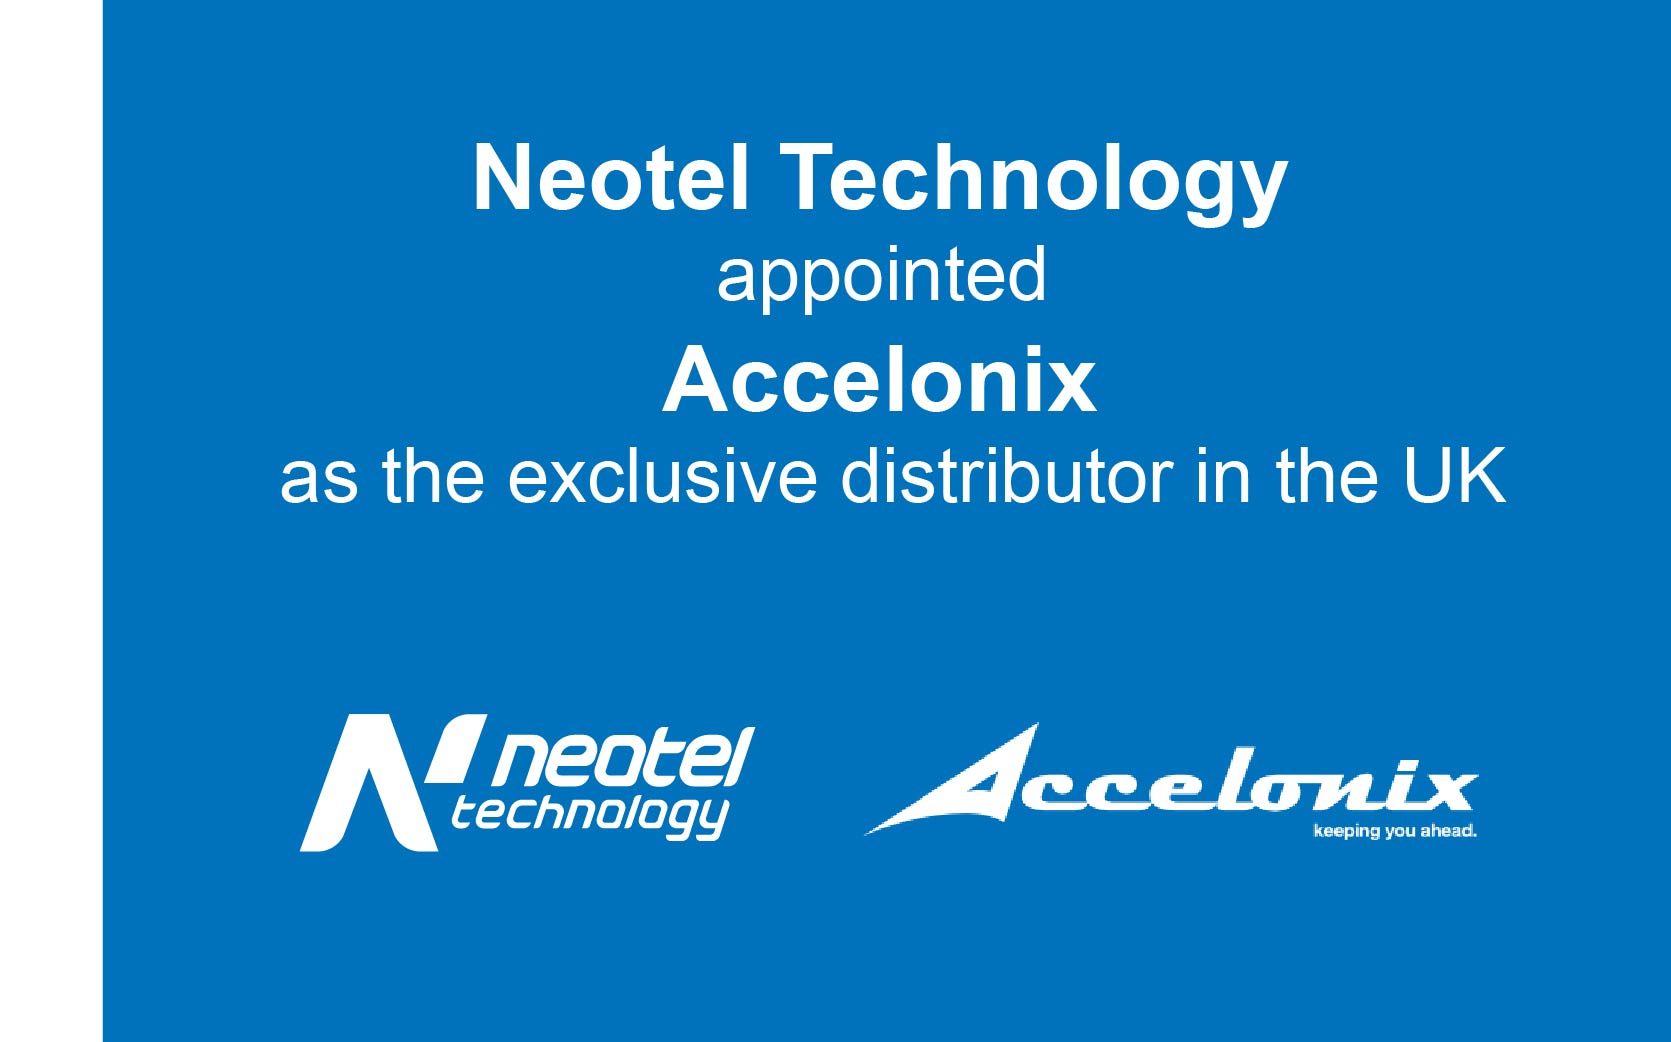 Neotel Technology appointed Accelonix as the exclusive distributor in the UK